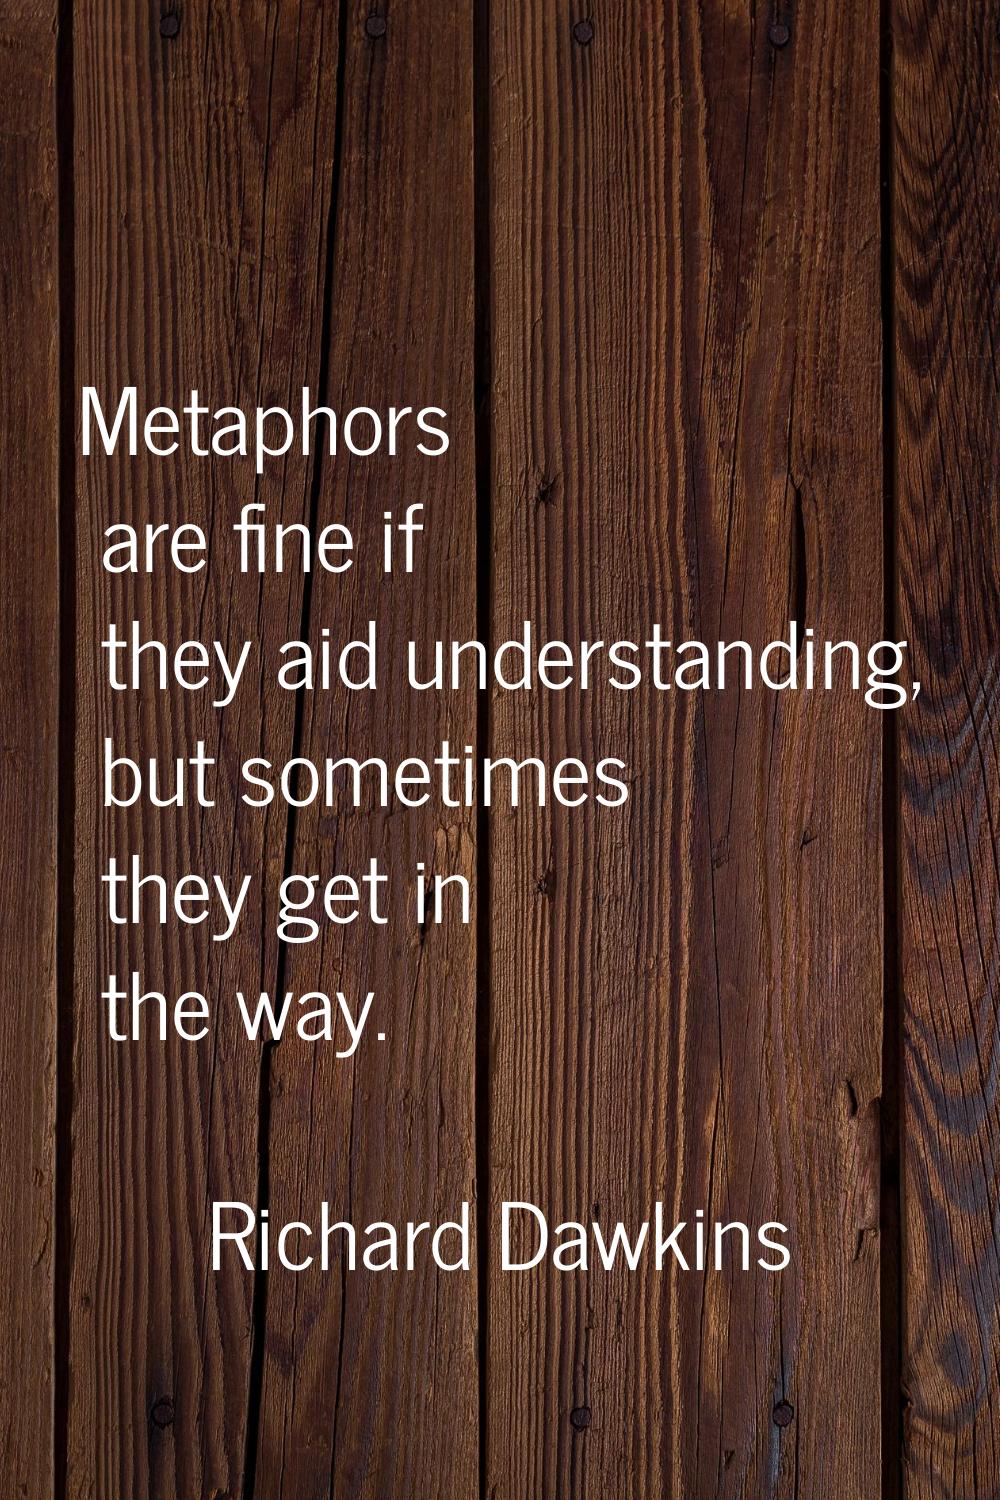 Metaphors are fine if they aid understanding, but sometimes they get in the way.